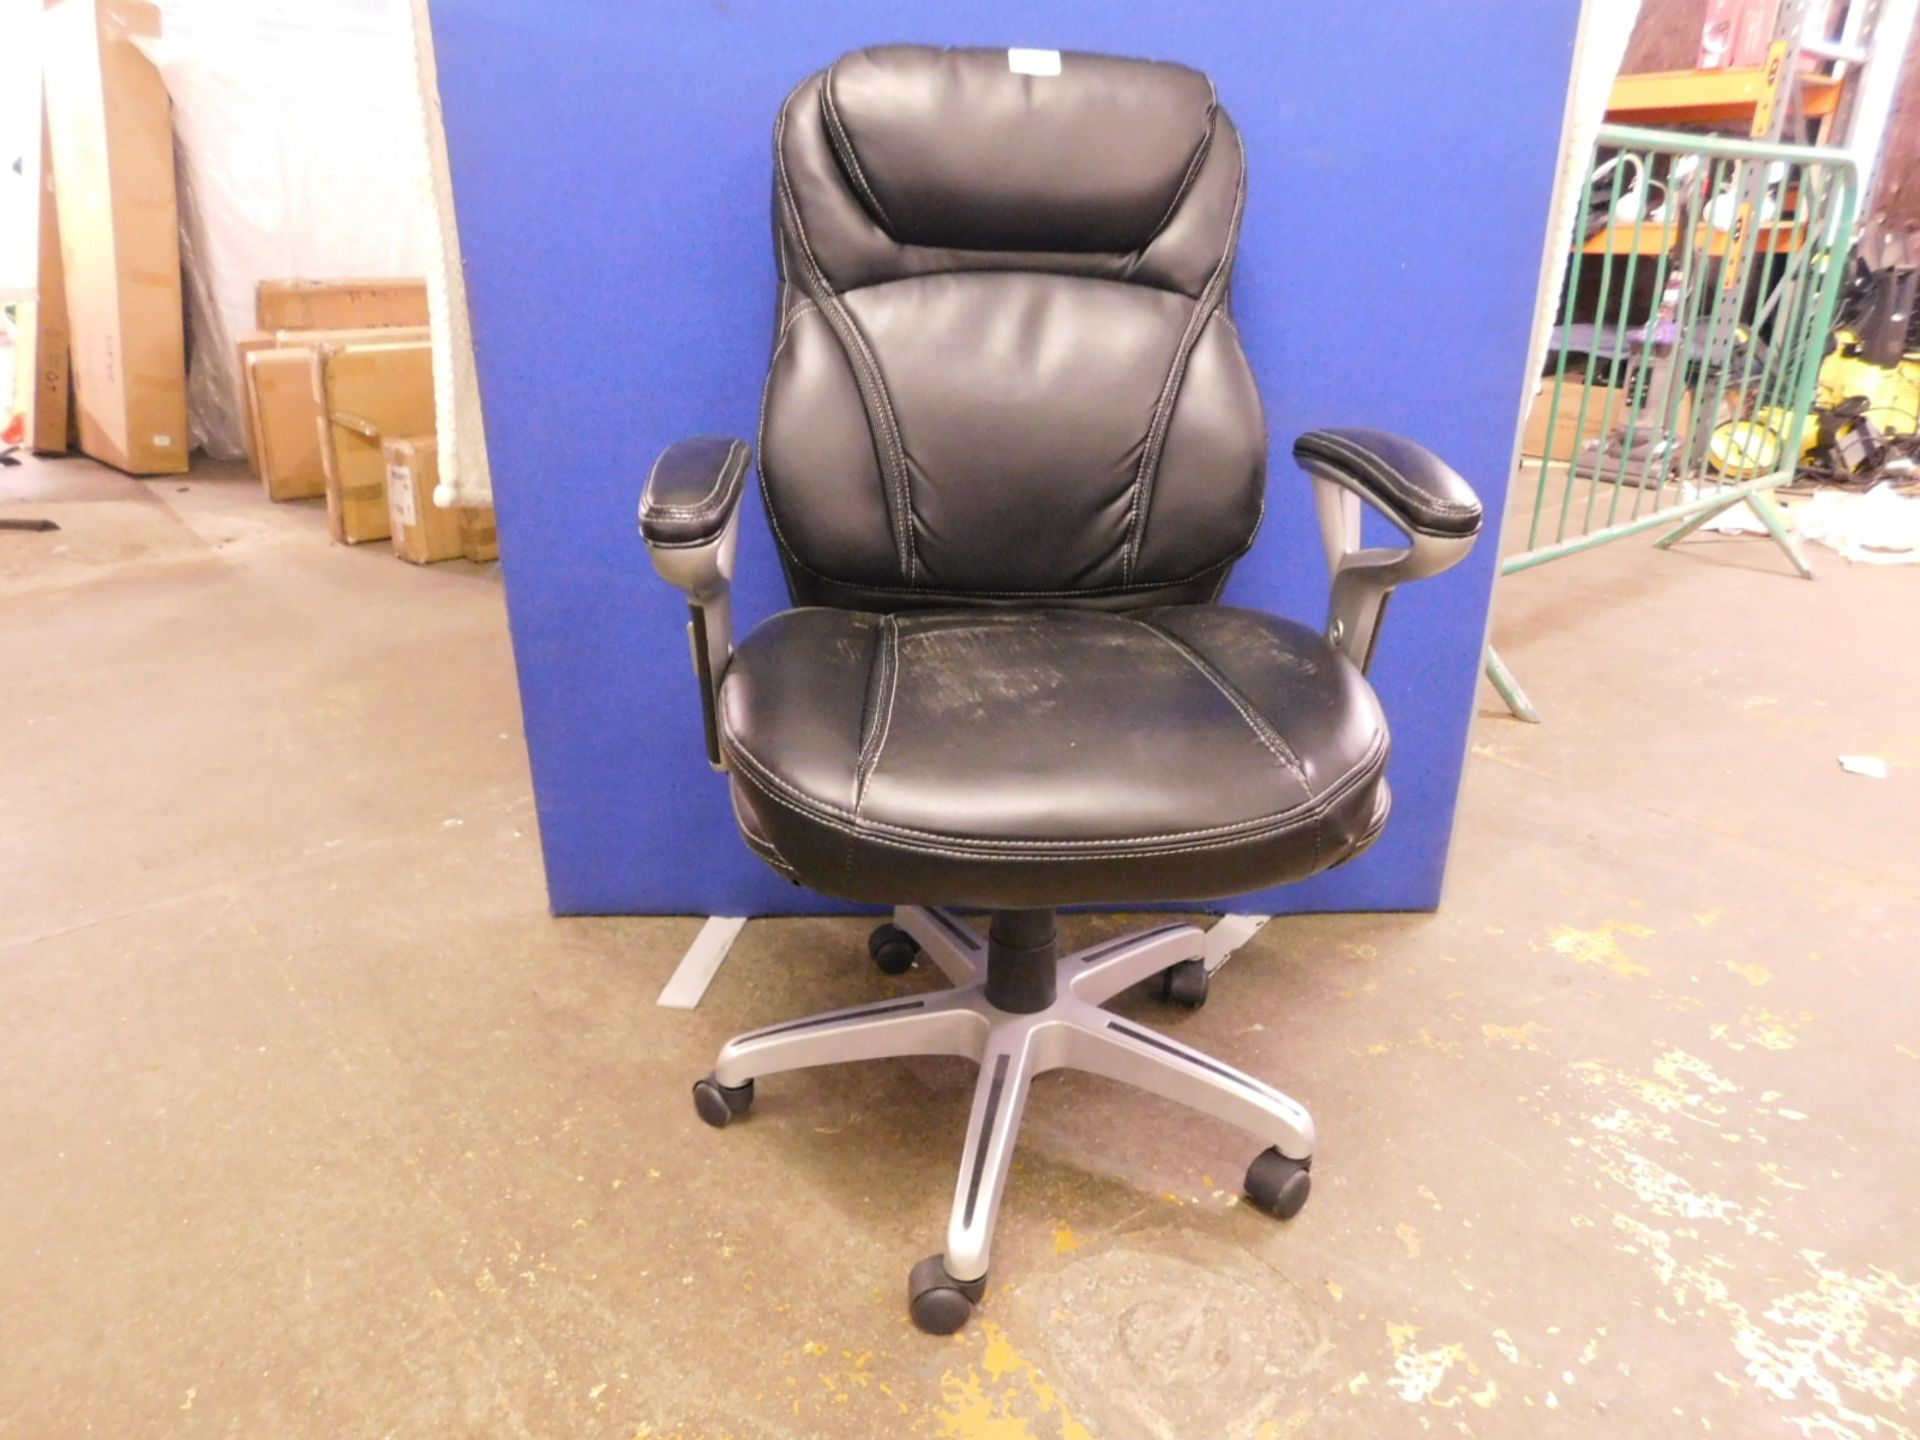 1 TRUE INNOVATIONS BLACK BONDED GAS LIFT STUDENT CHAIR RRP £149.99